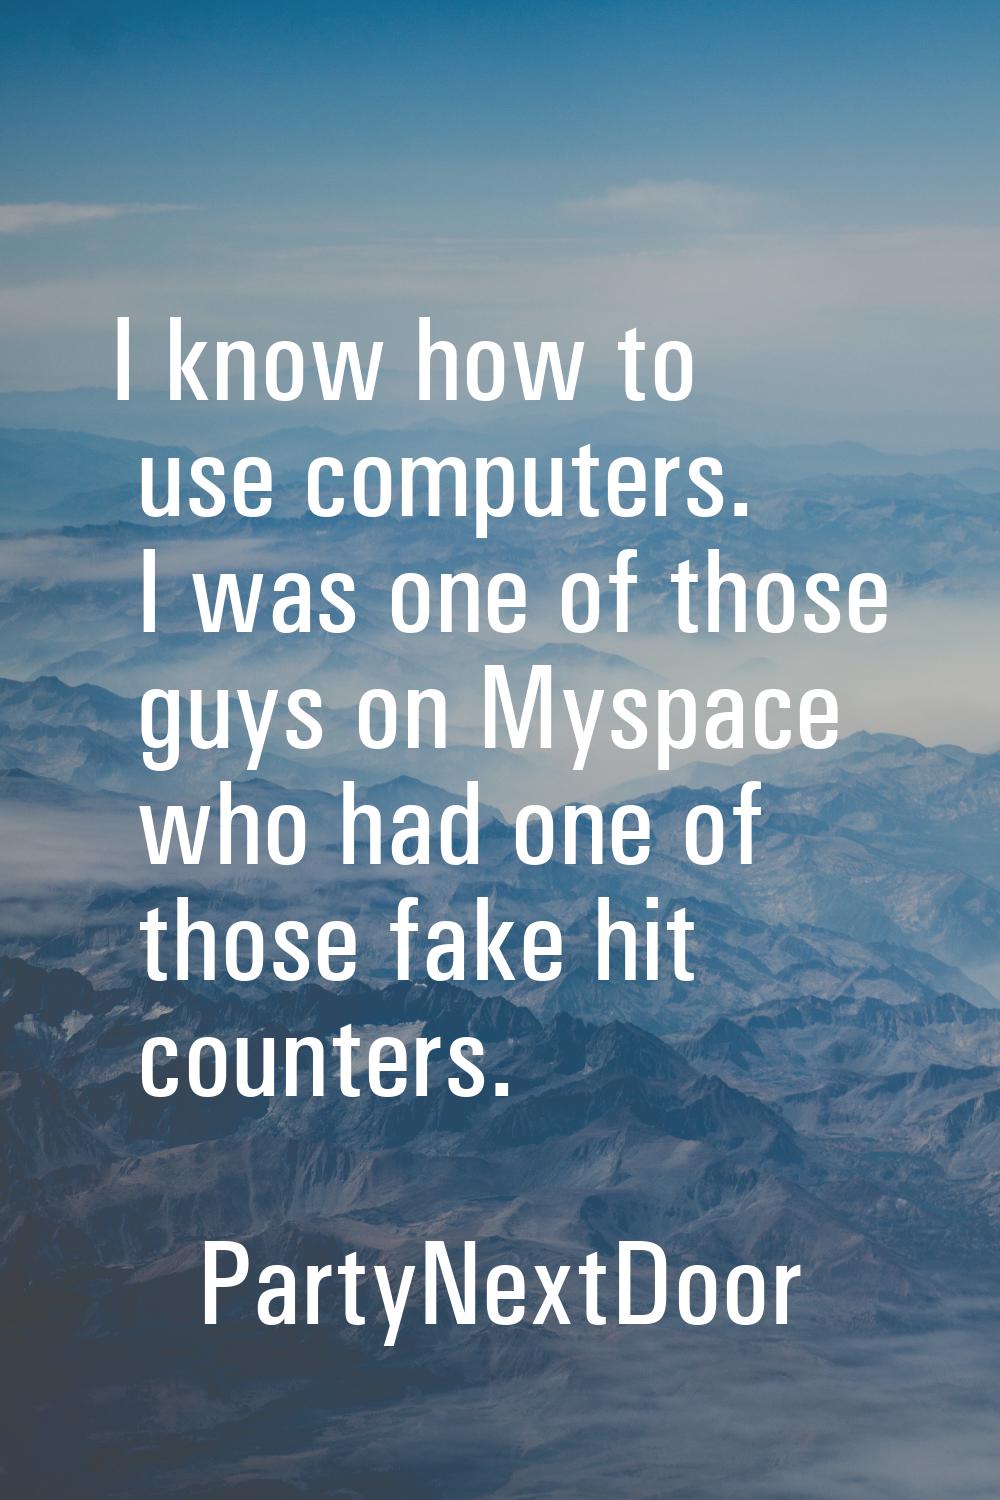 I know how to use computers. I was one of those guys on Myspace who had one of those fake hit count